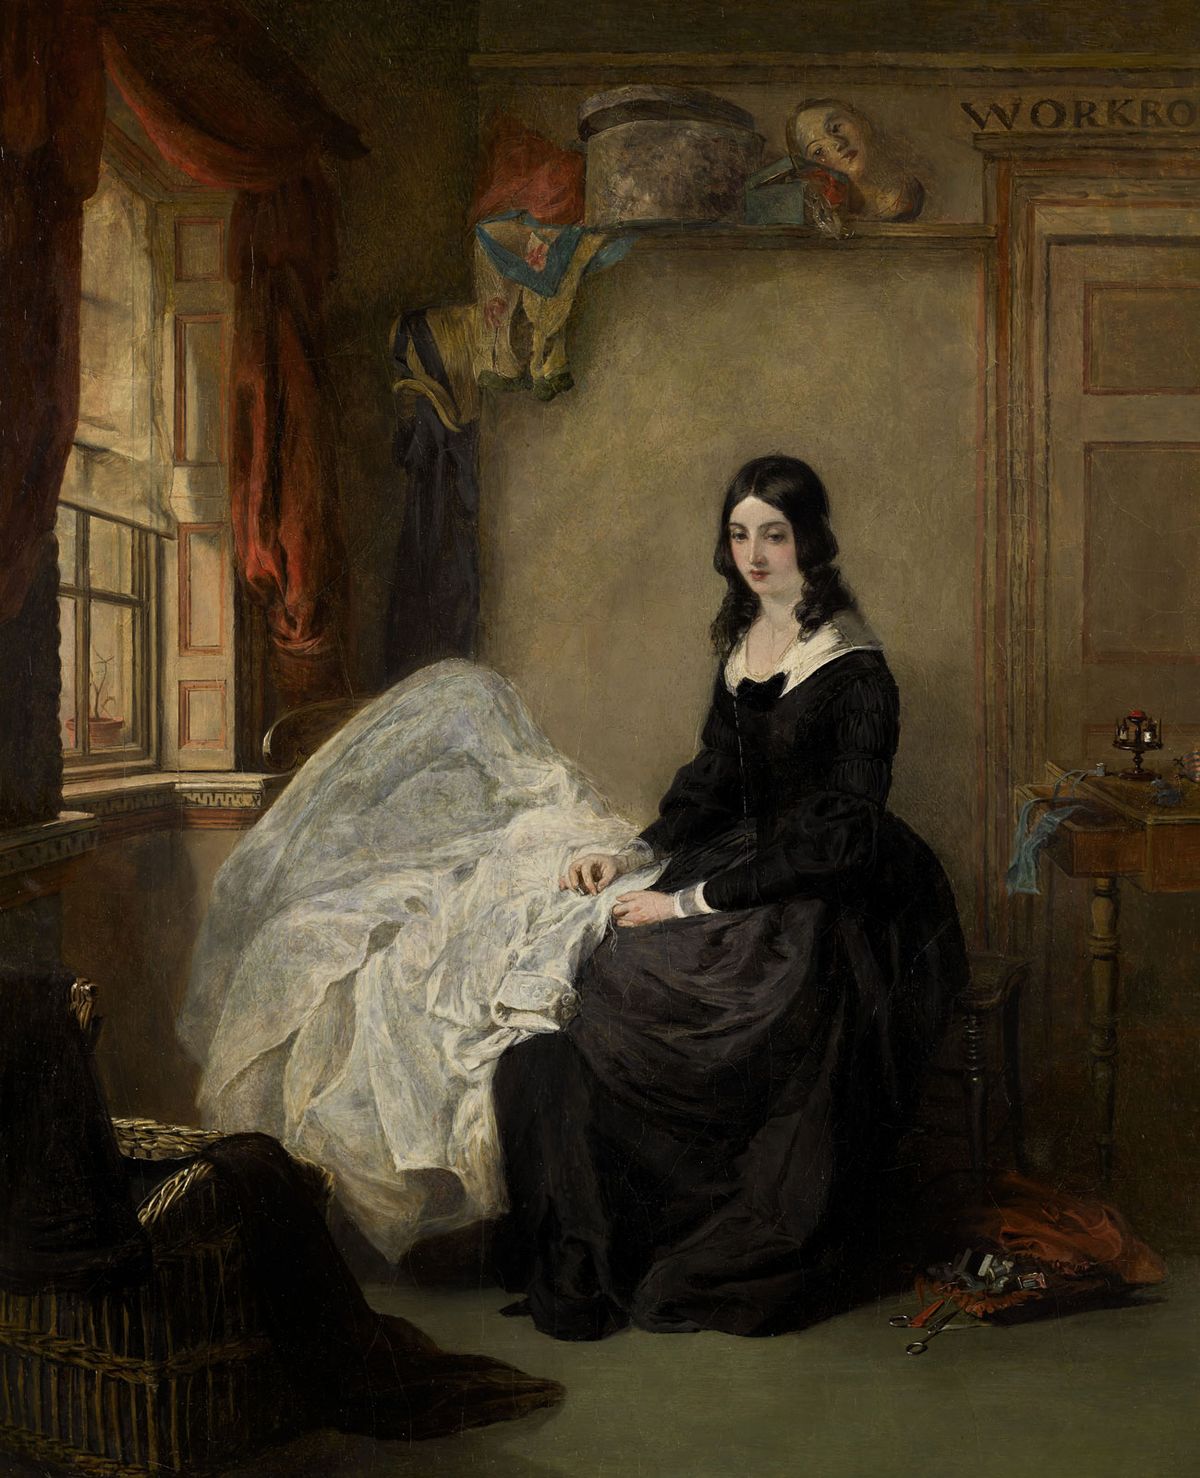 William Powell Frith's portrait of Dickens's heroine Kate Nickleby will auctioned at Sotheby's London on 10 December Image: courtesy of Sotheby's